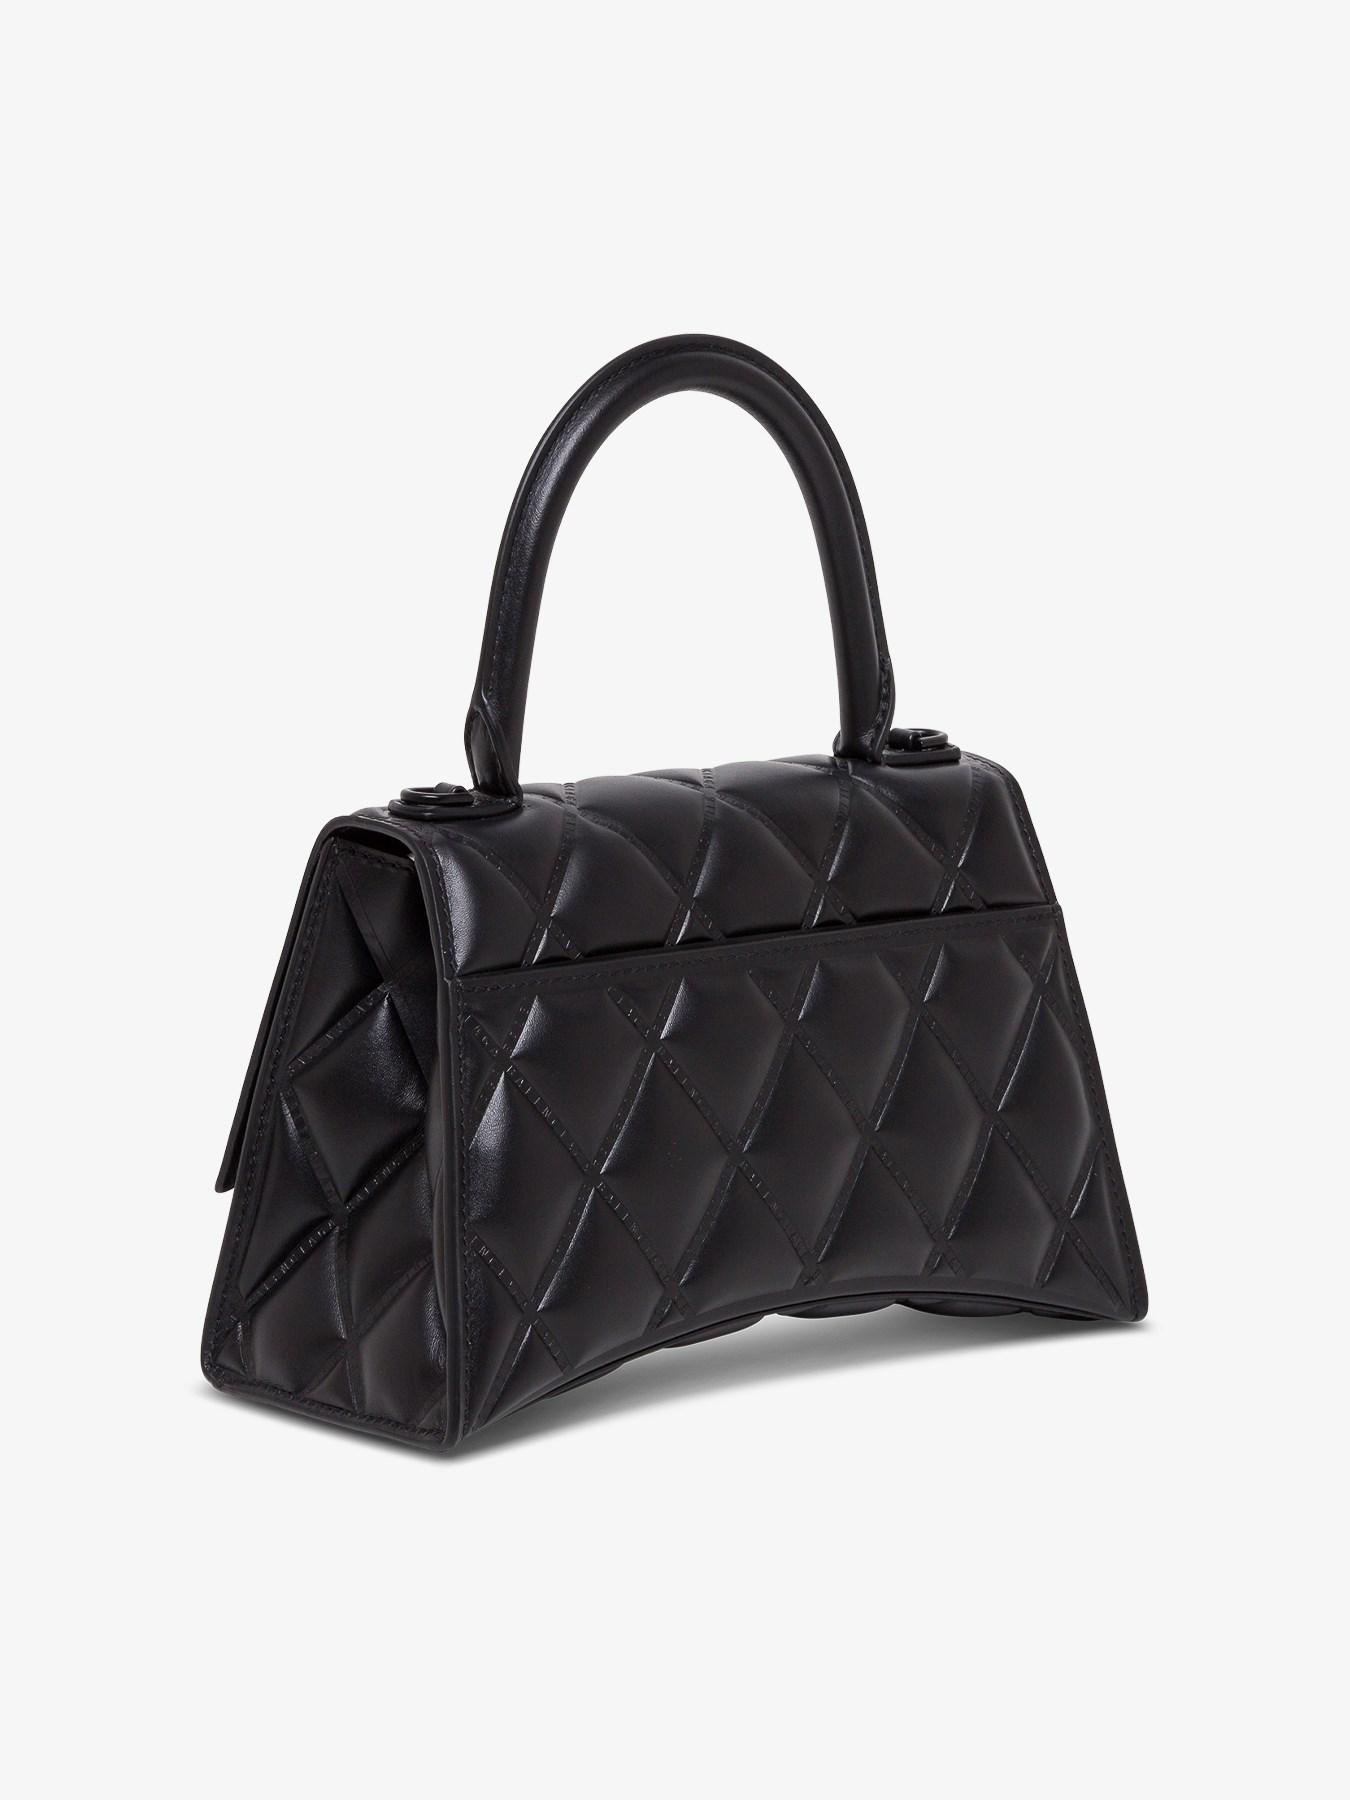 Balenciaga Small Hourglass Handbag In Quilted Leather in Black - Lyst